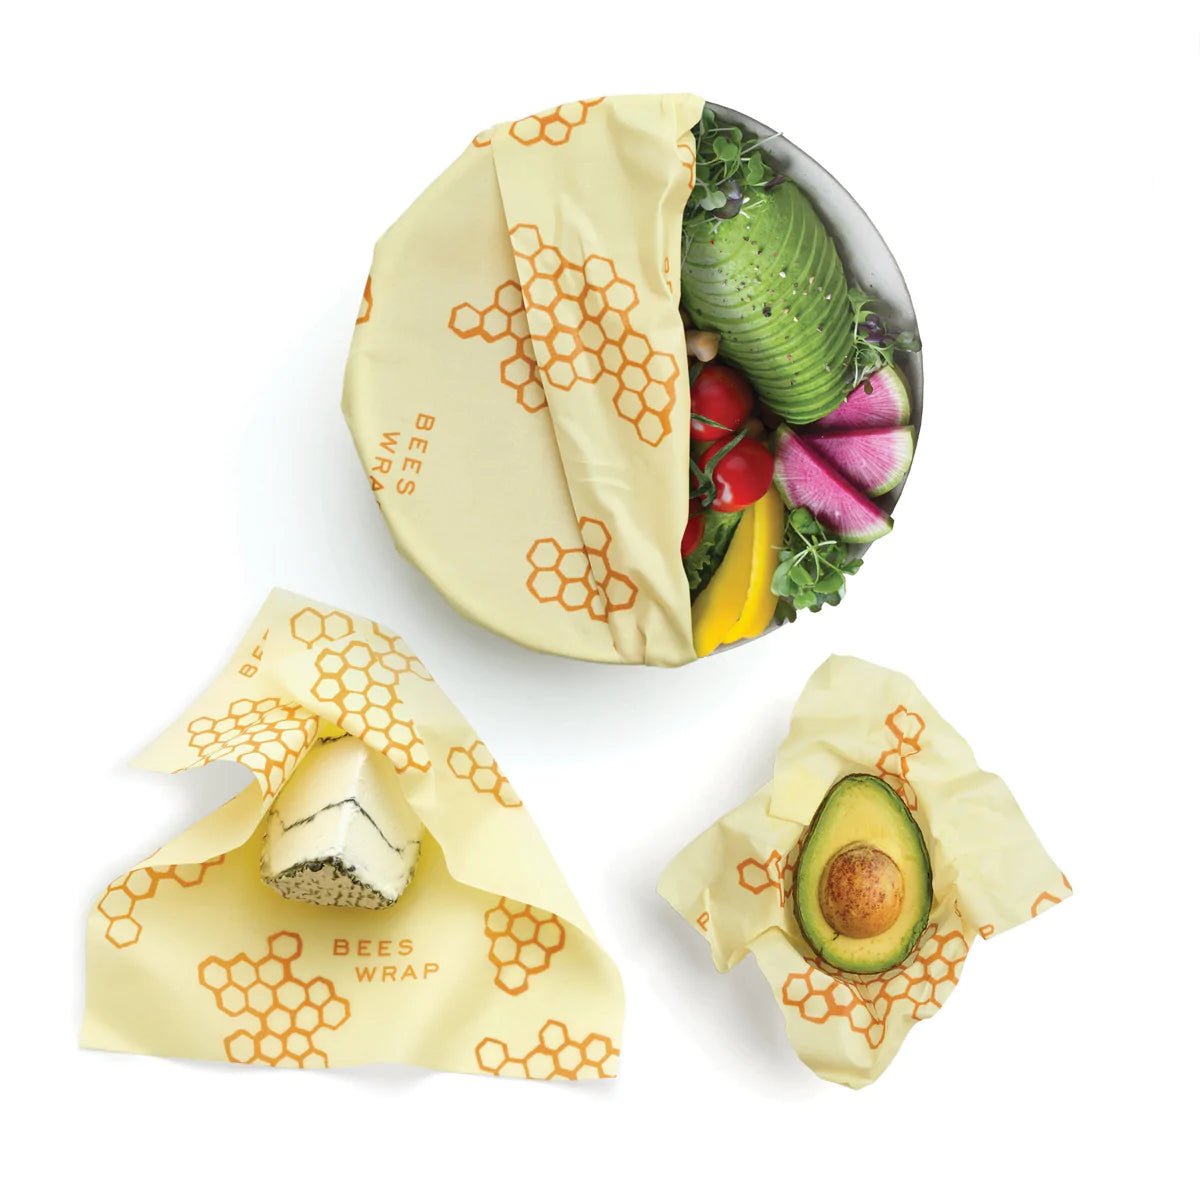 Bee's Wrap - HexHugger Bowl Covers 3 Pack - Honeycomb